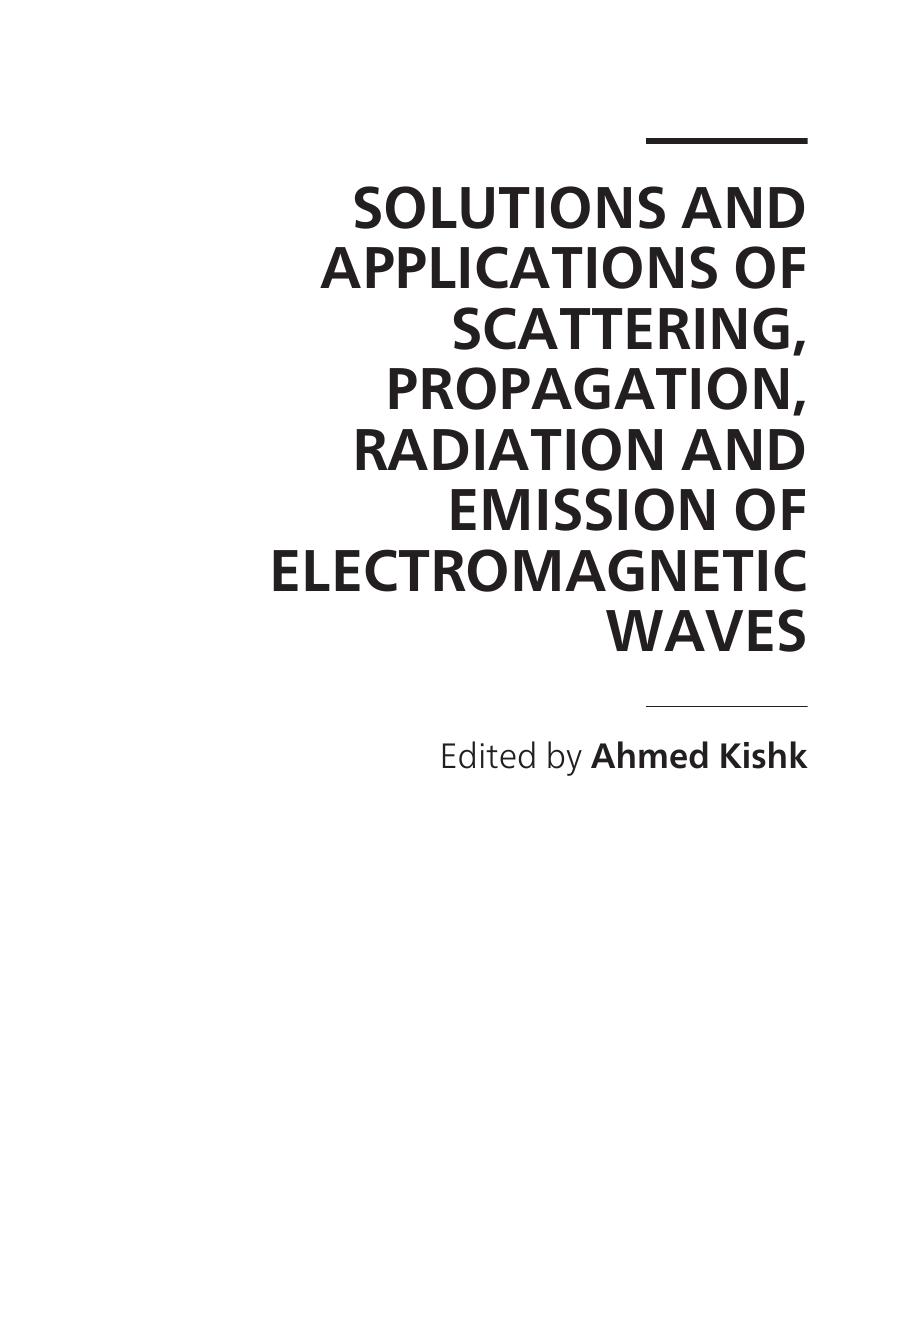 Solutions and Applications of Scattering  Propagation  Radiation and Emission of Electromagnetic Waves 2012.pdf